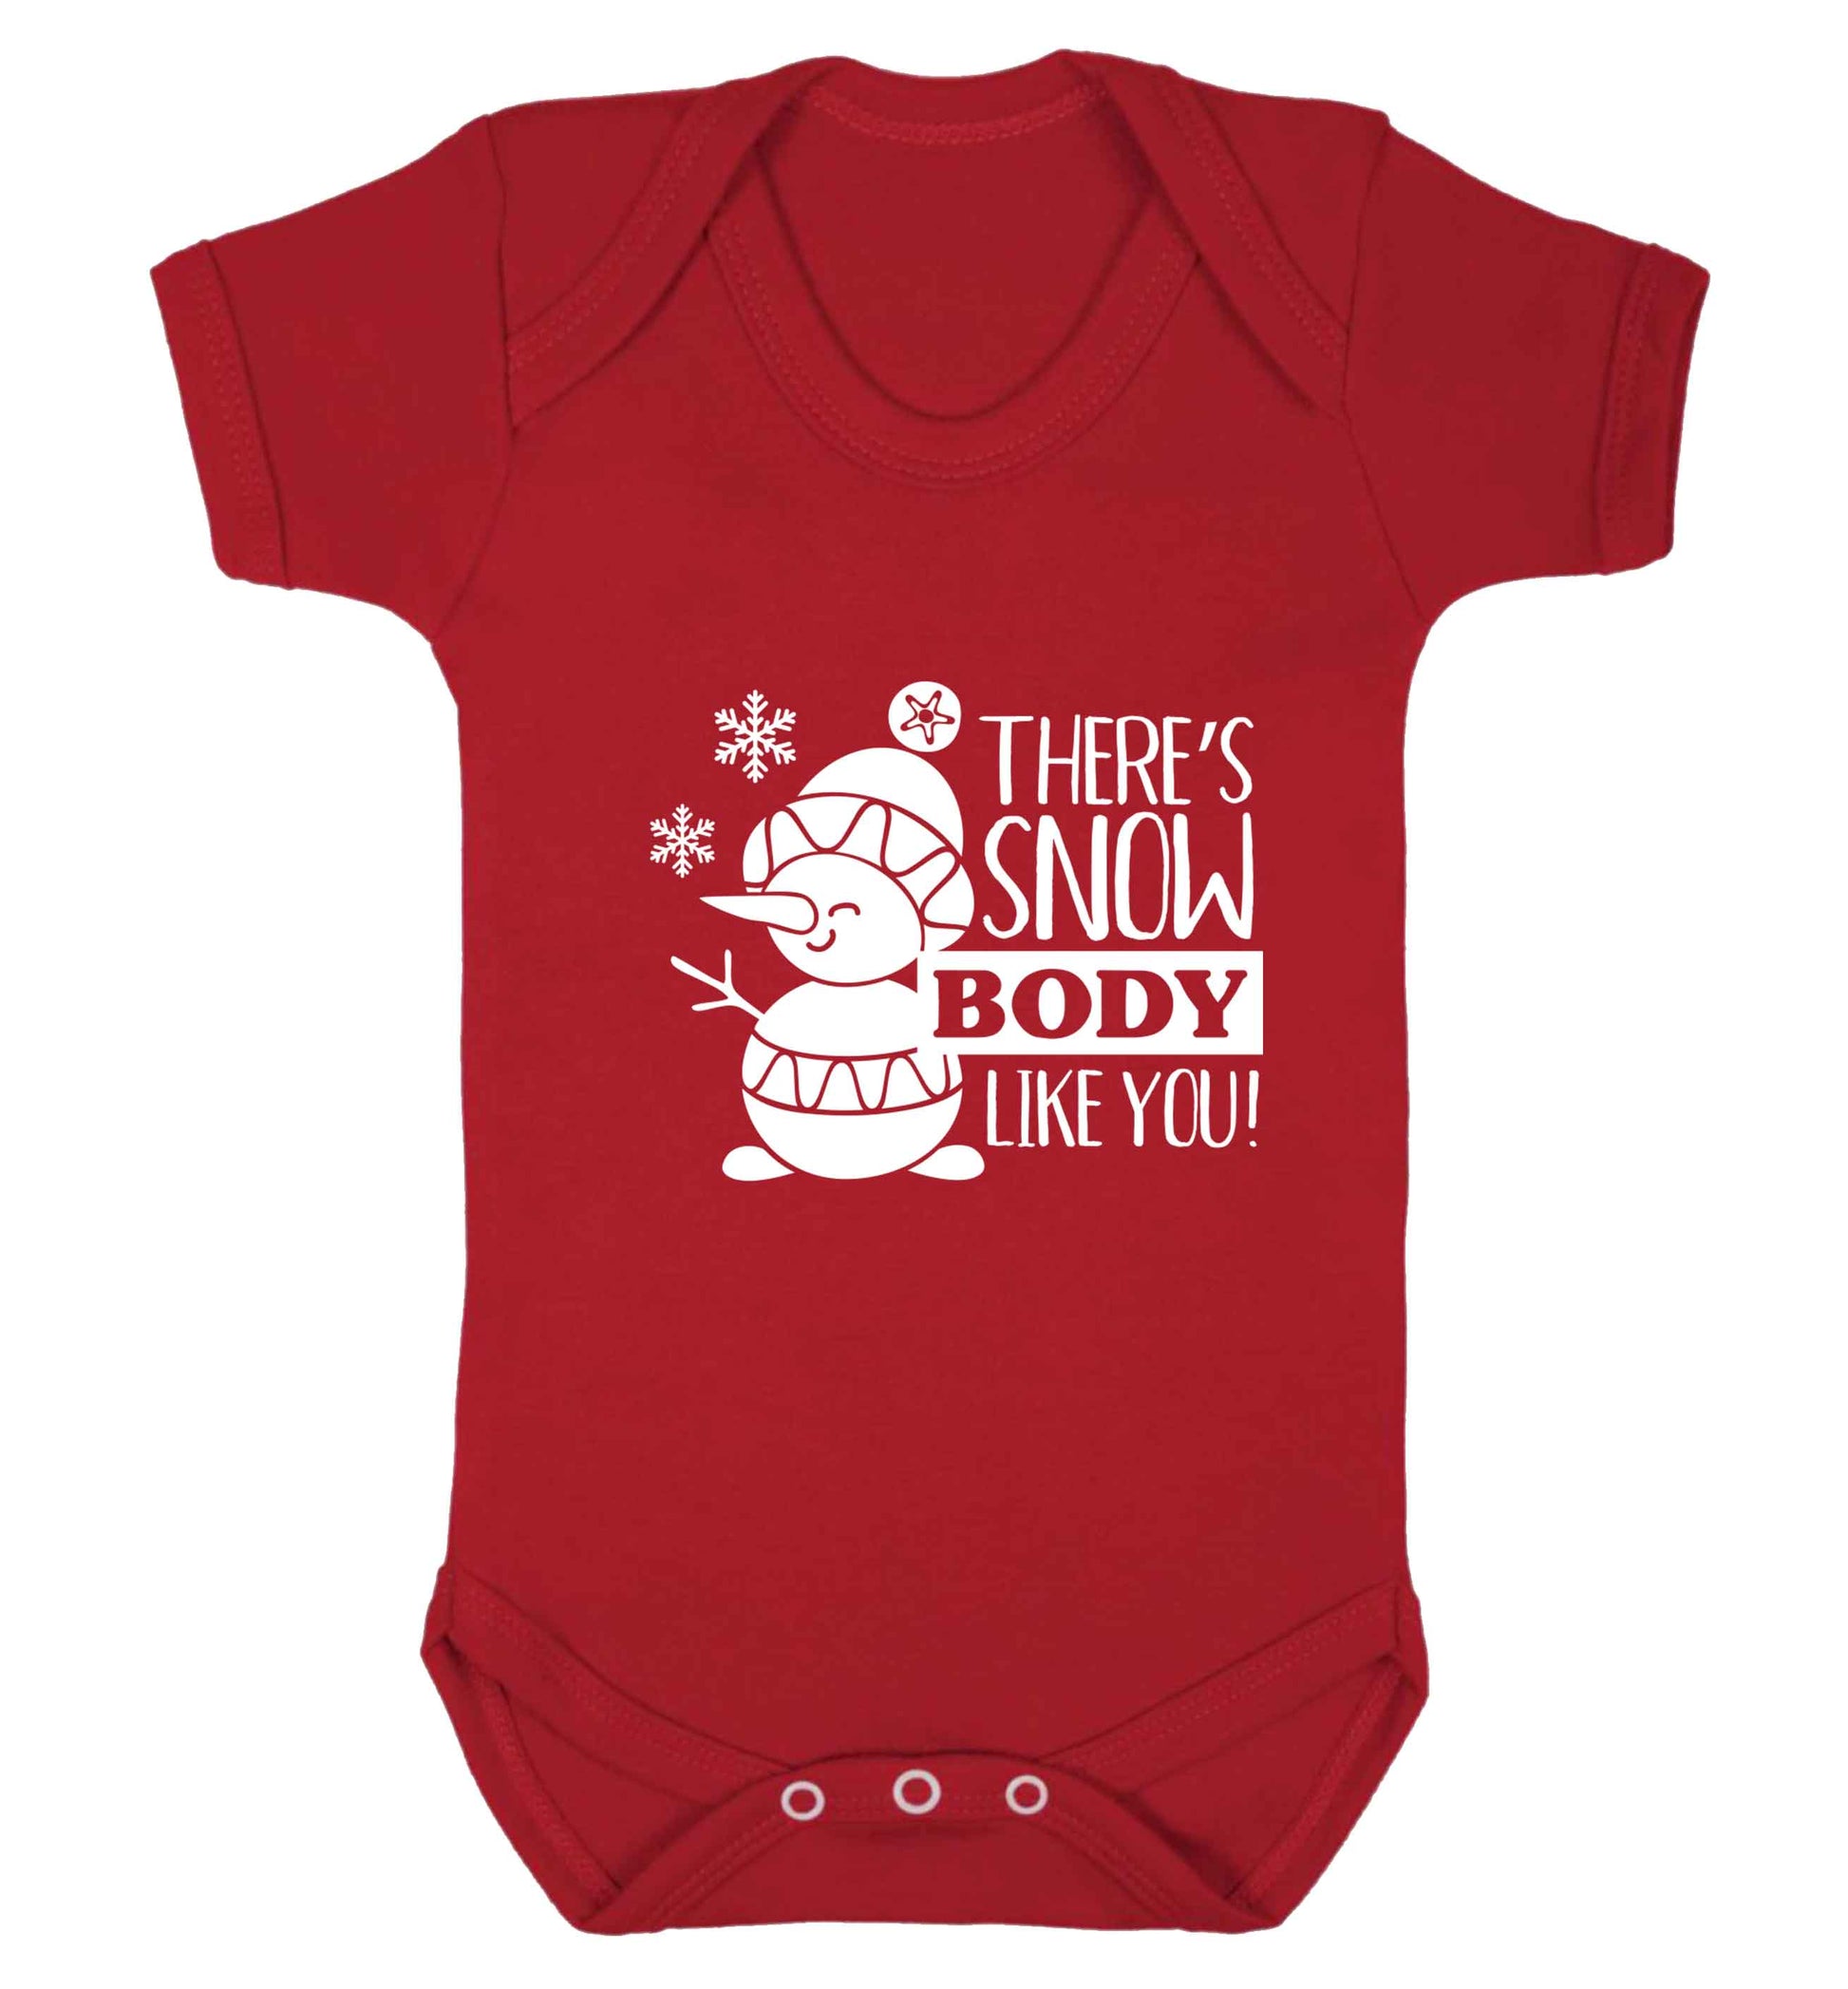 There's snow body like you baby vest red 18-24 months